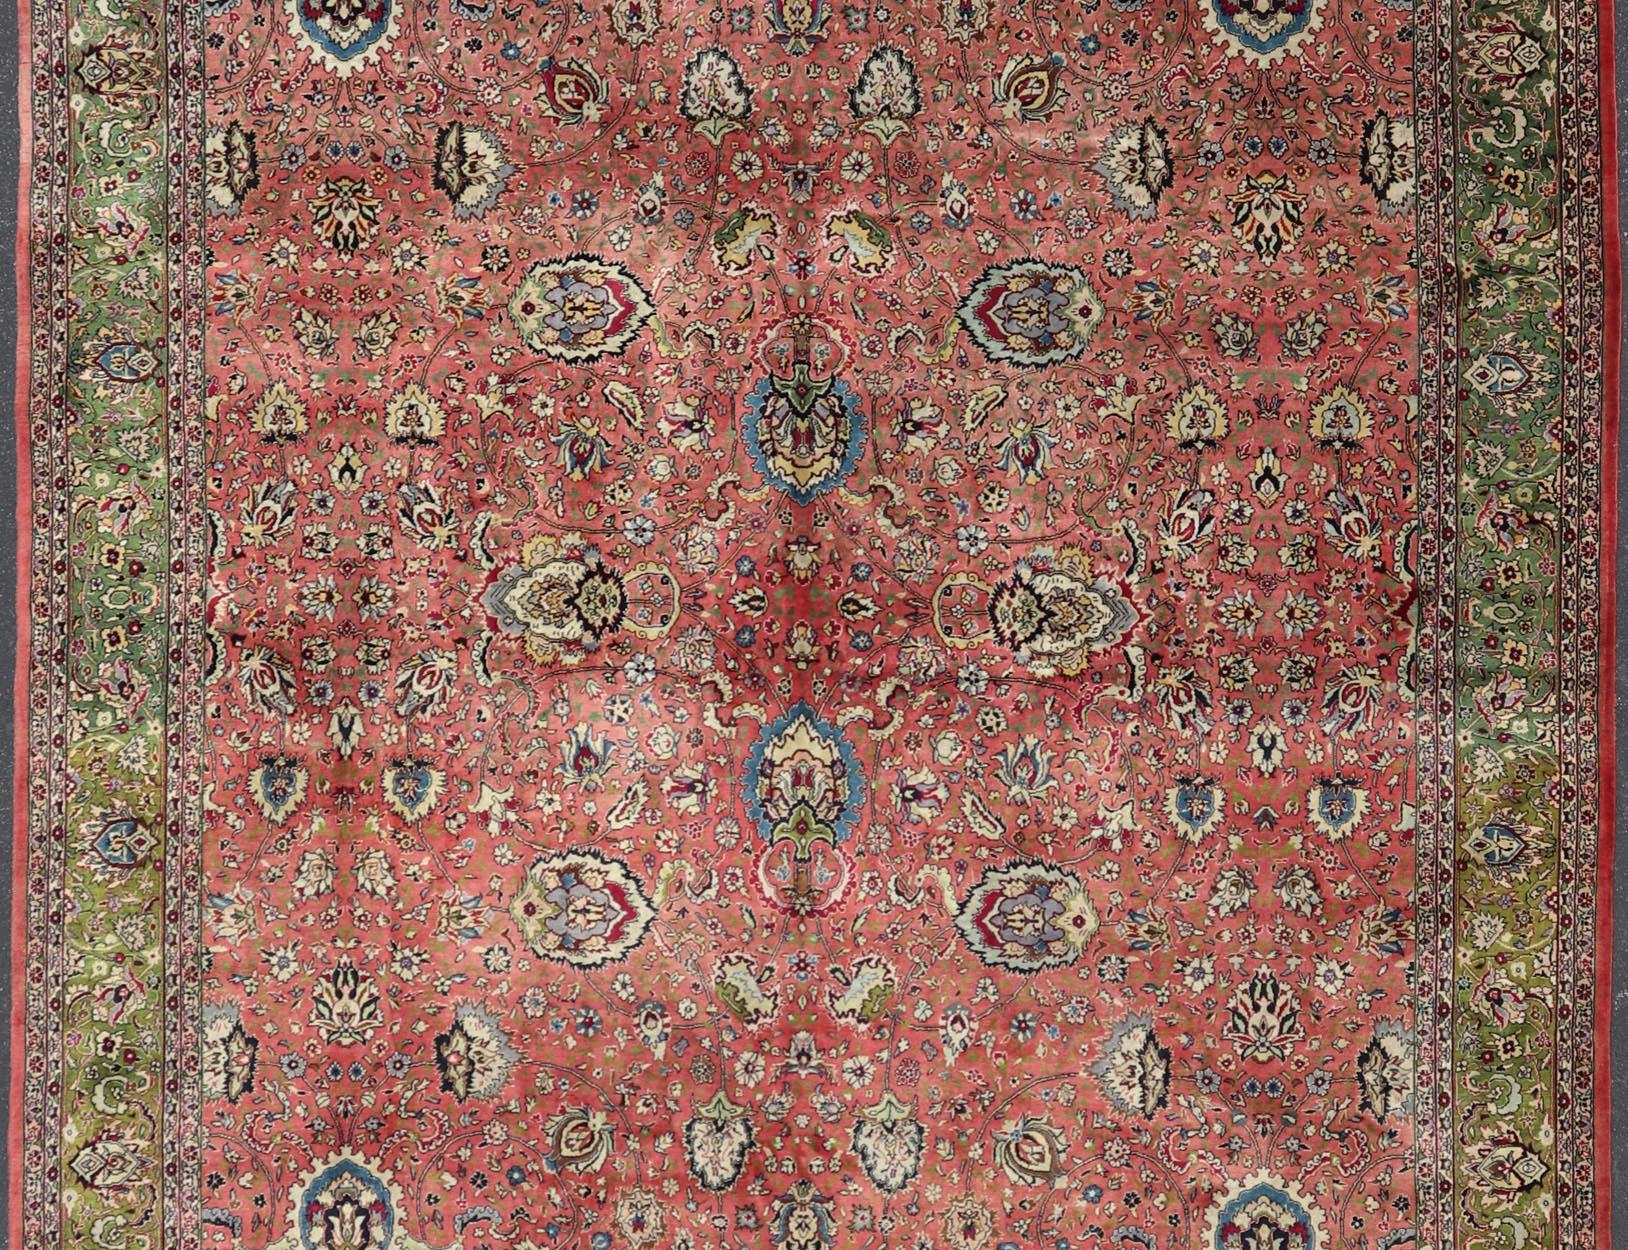 Large Square Size Vintage Persian Tabriz Rug  in Coral Pink and Acid Green For Sale 8